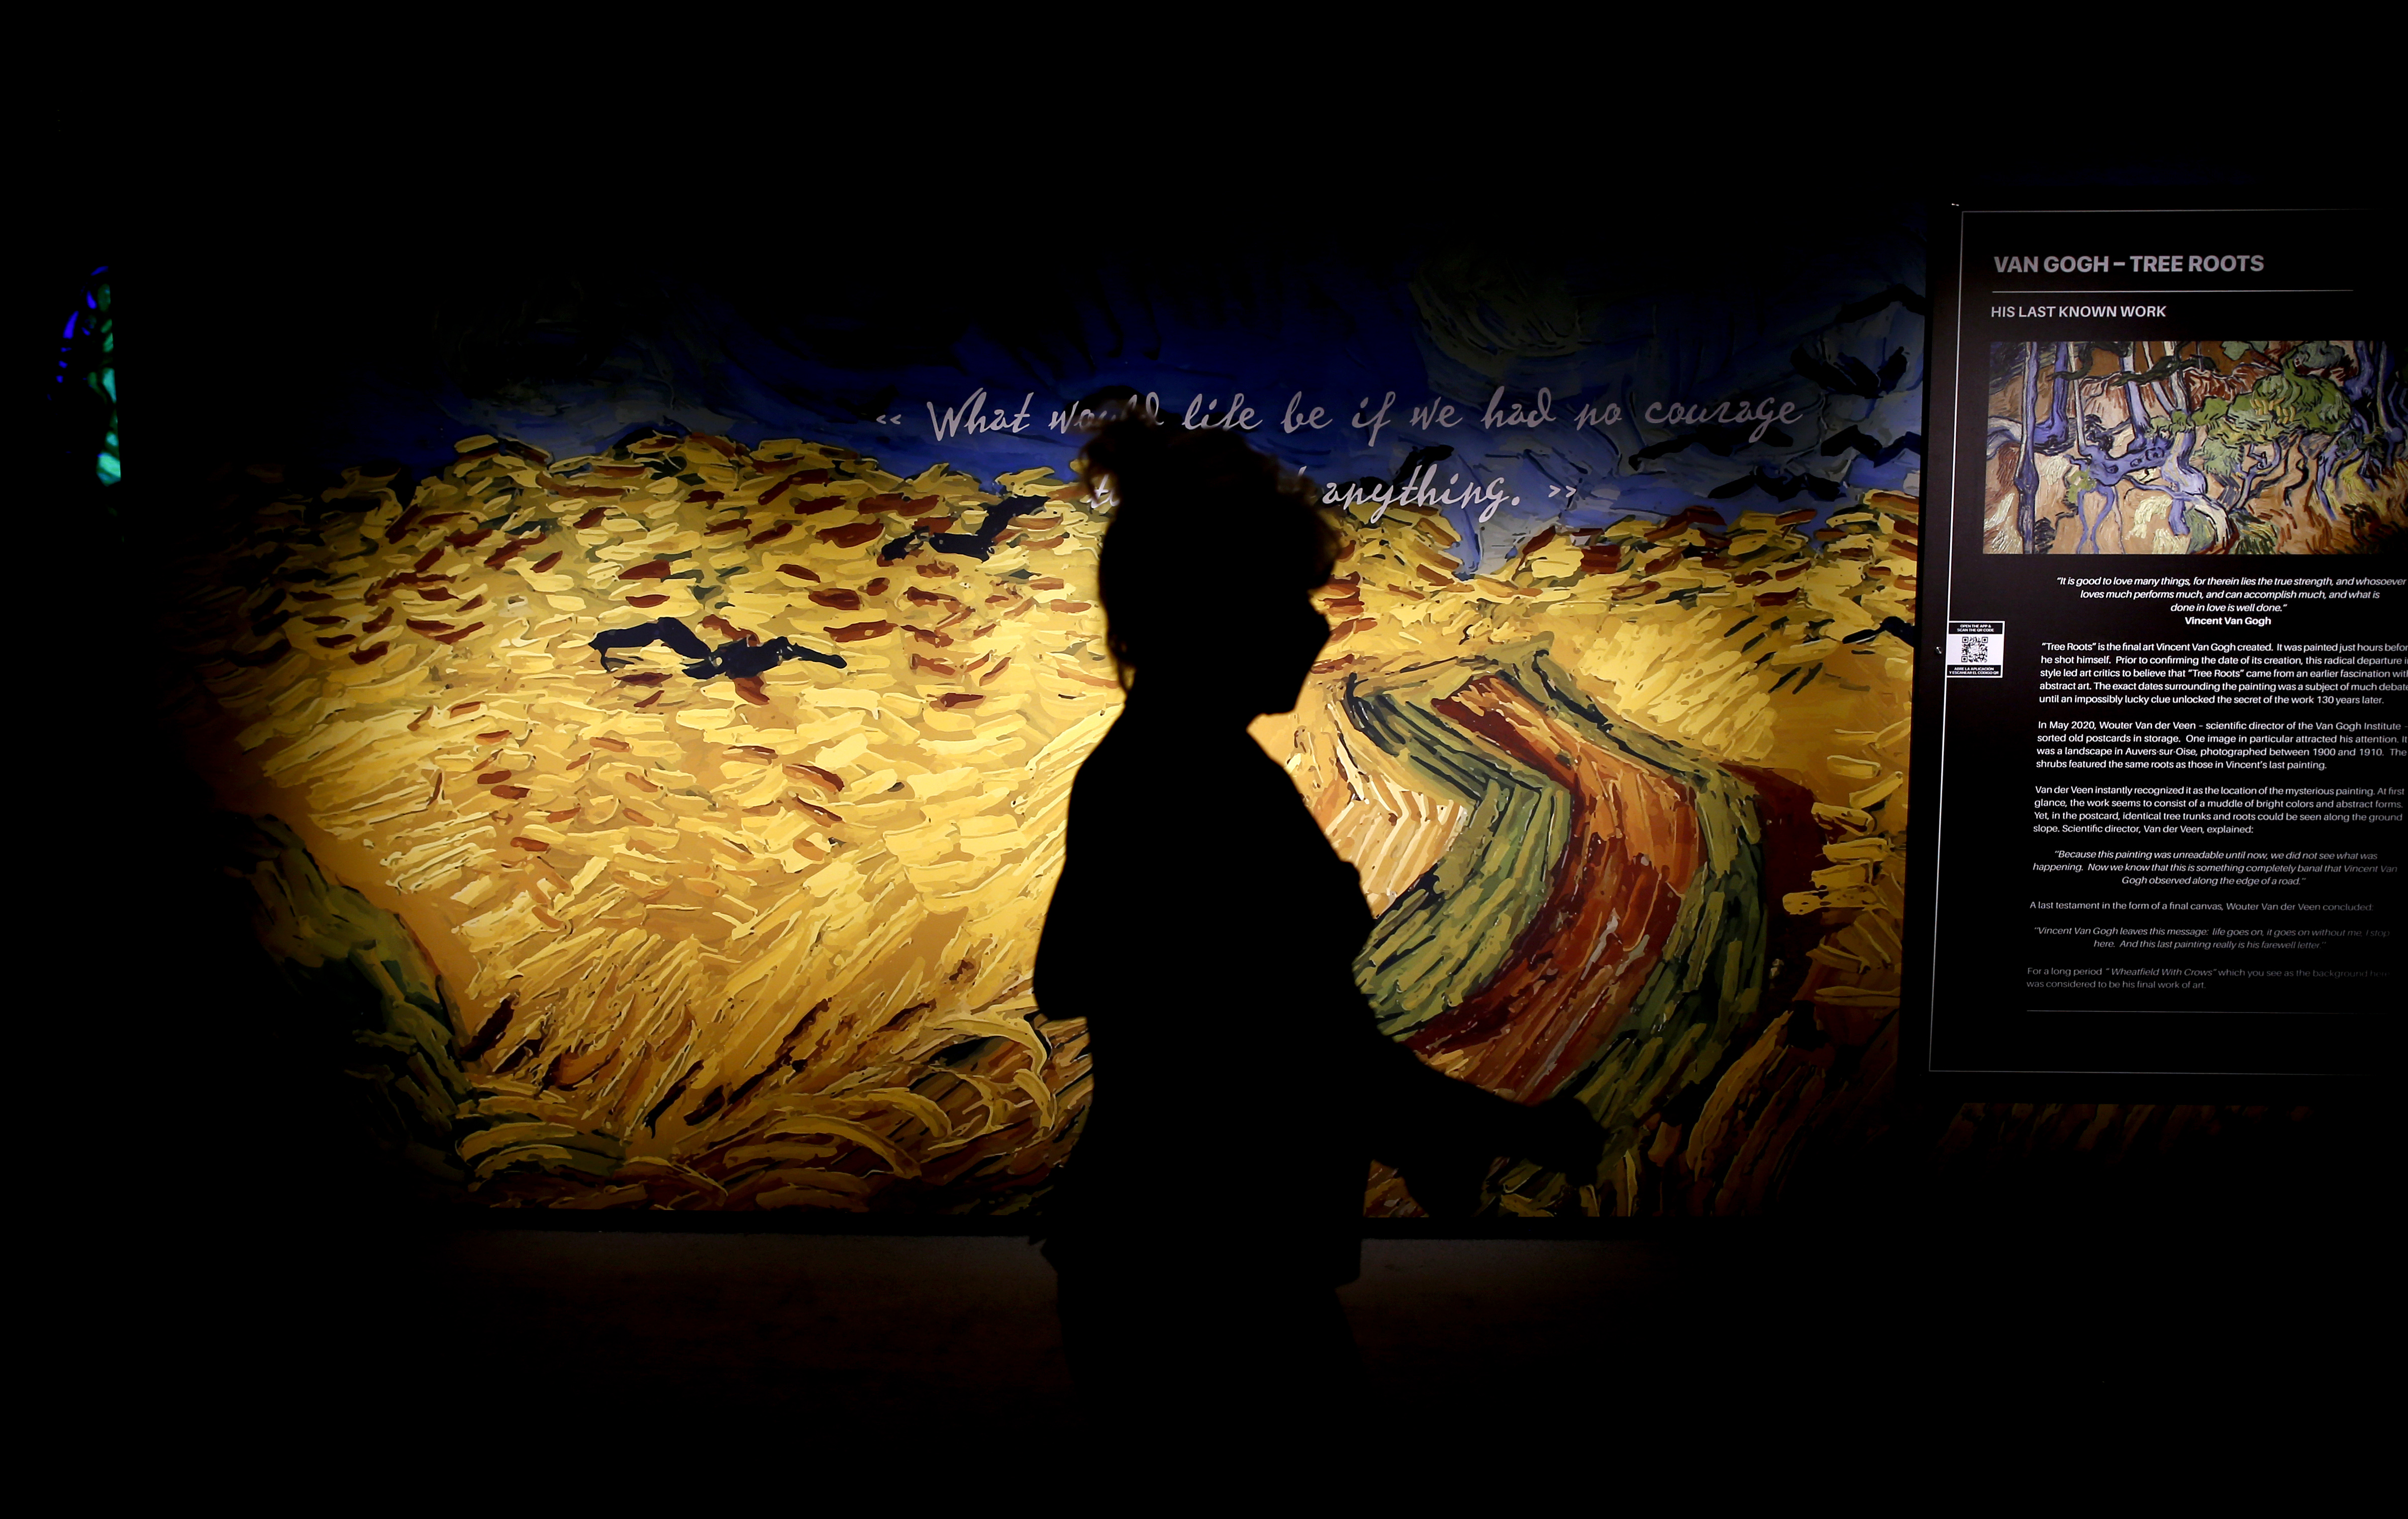 The clues to Vincent van Gogh's final days are hidden in his last